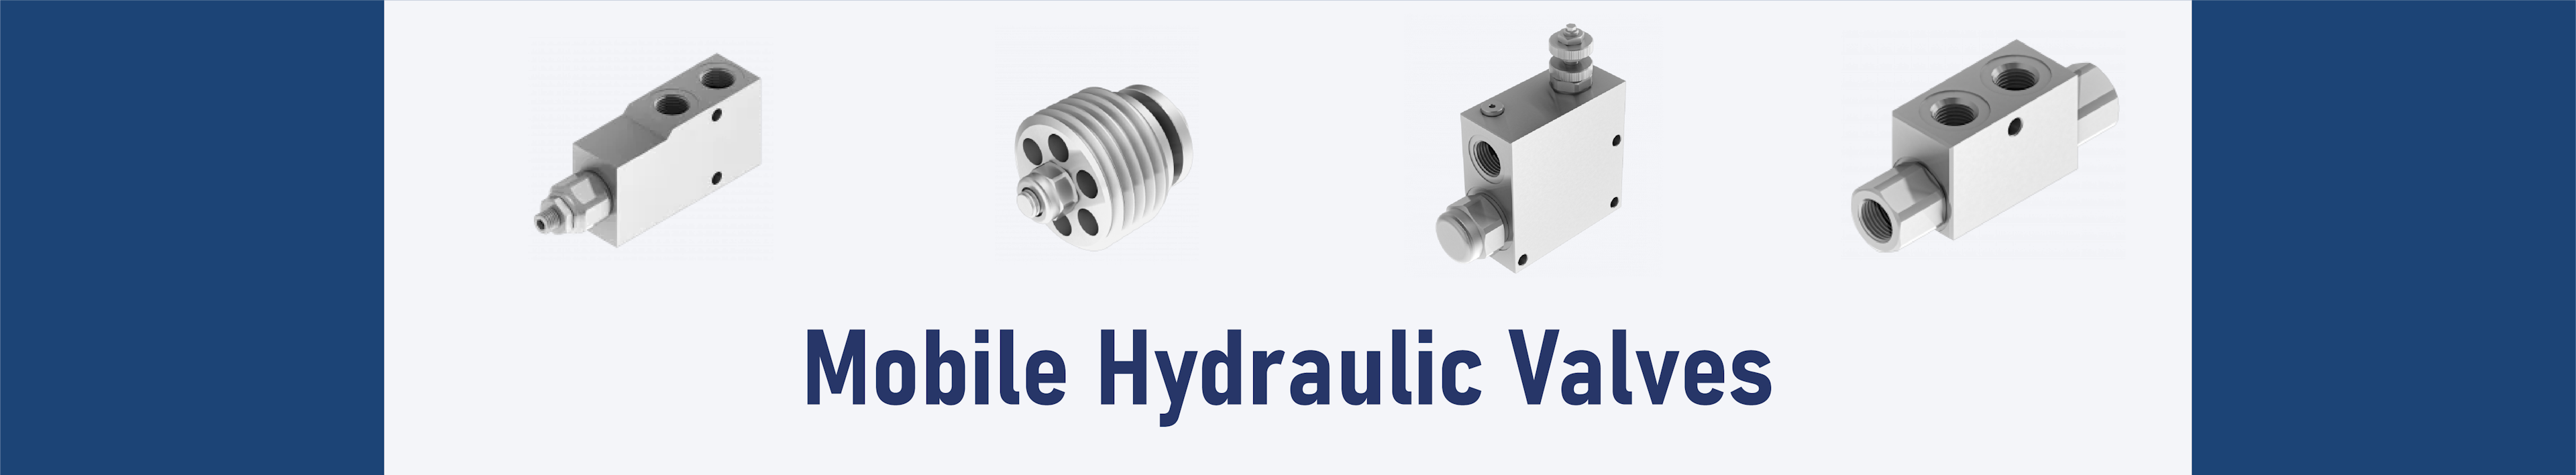 Hydraulic mobile valves